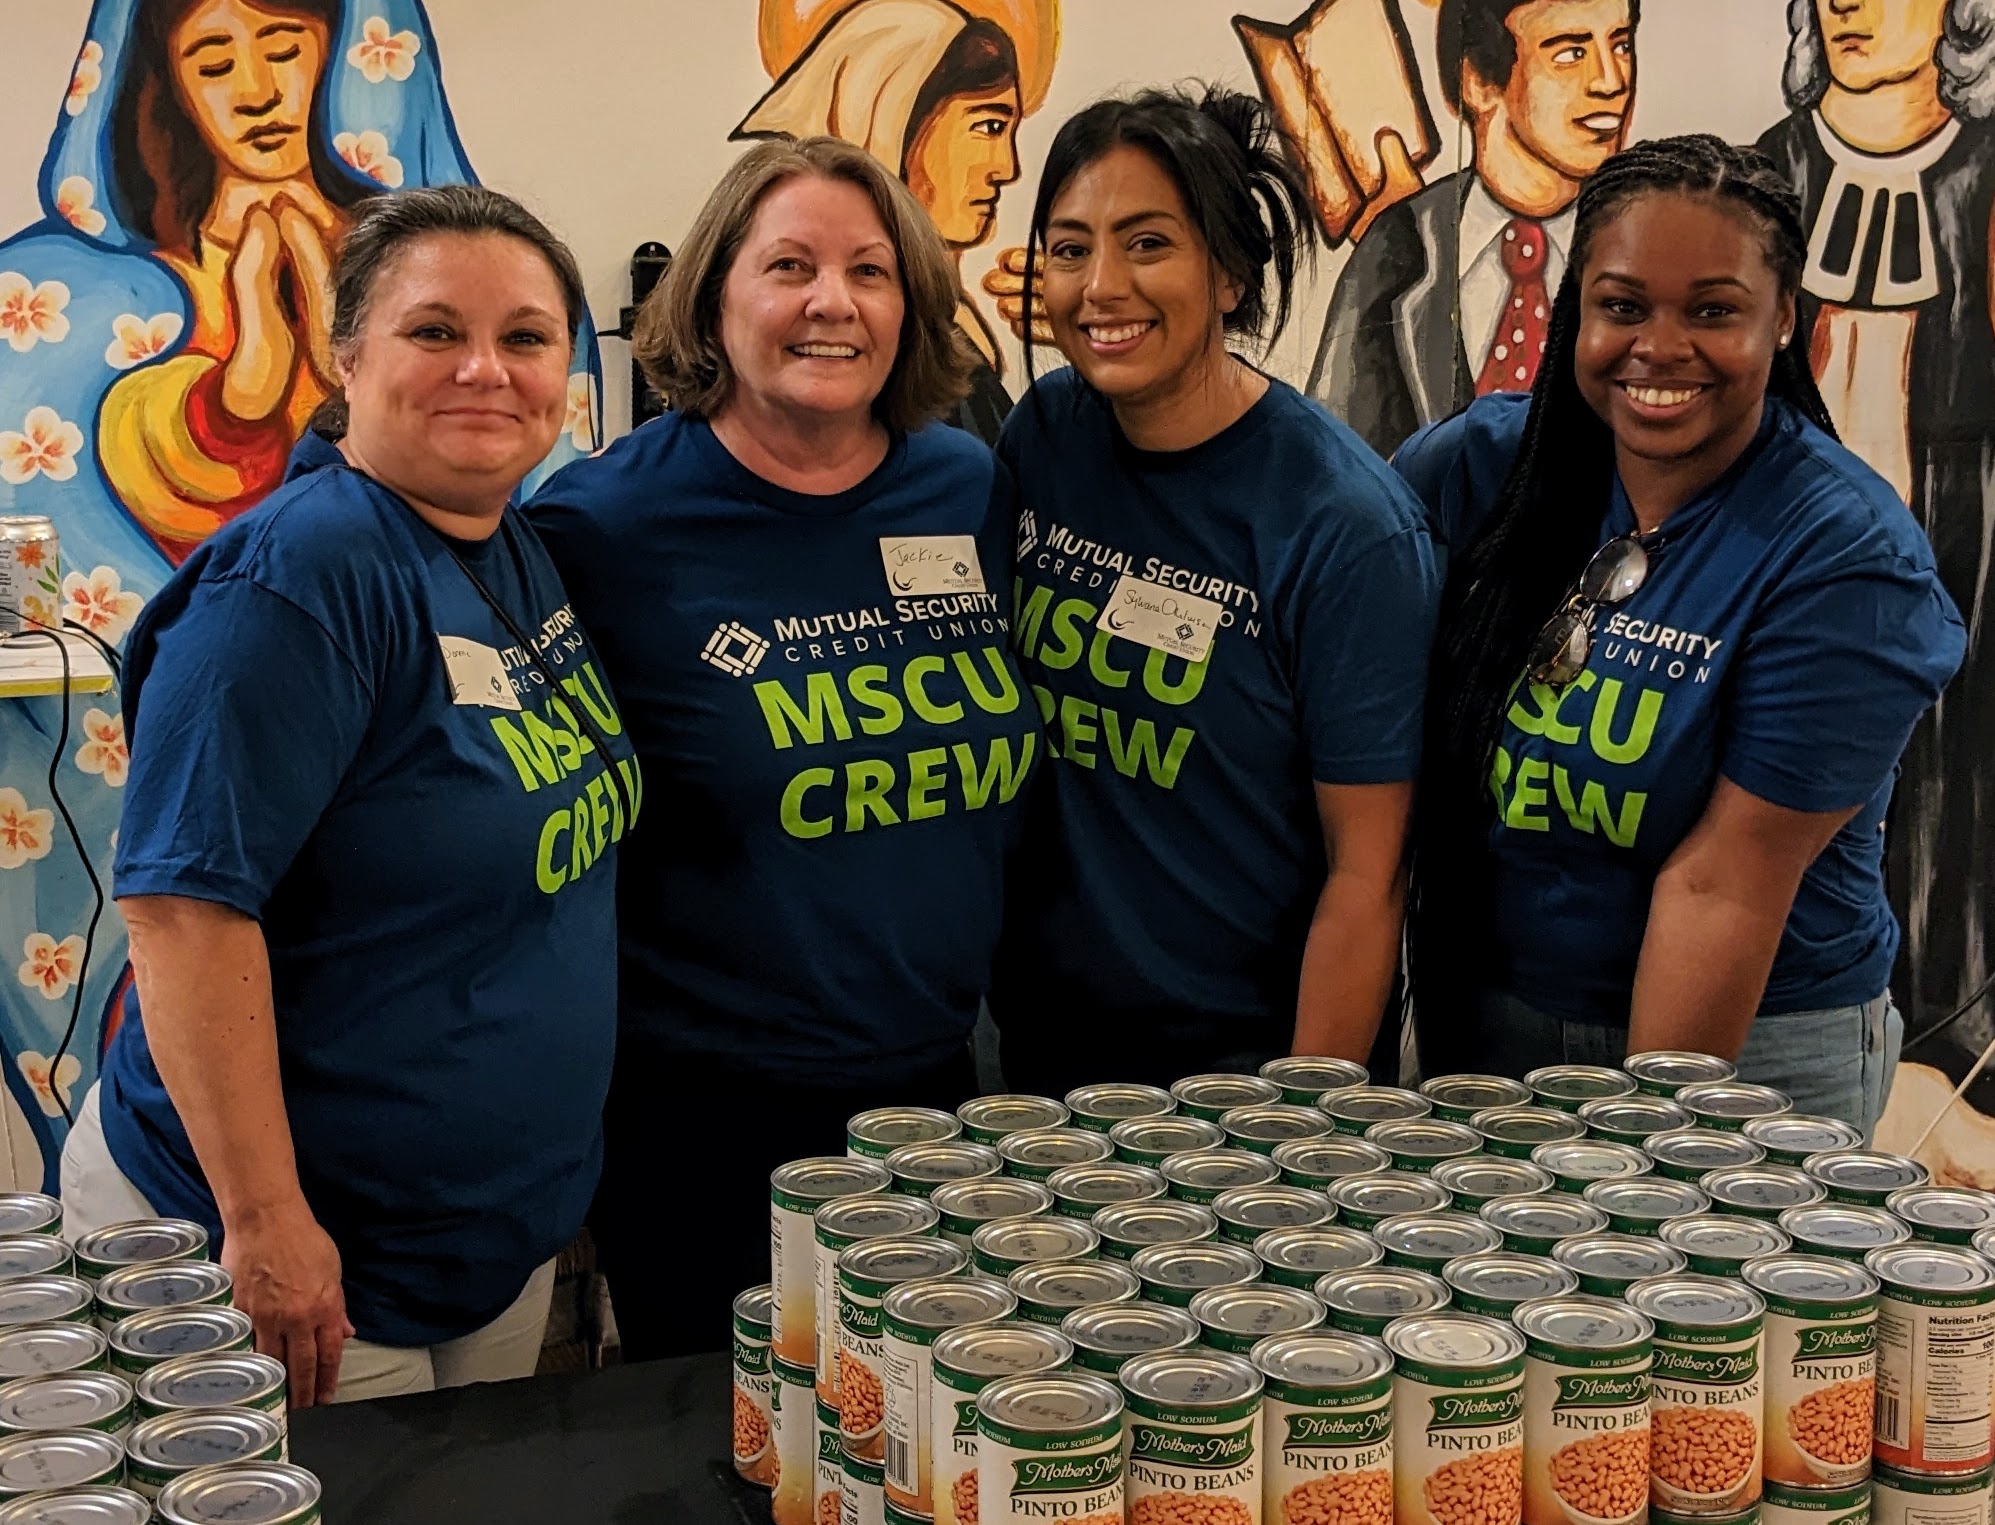 MSCU employees at fundraiser with cans in front of them